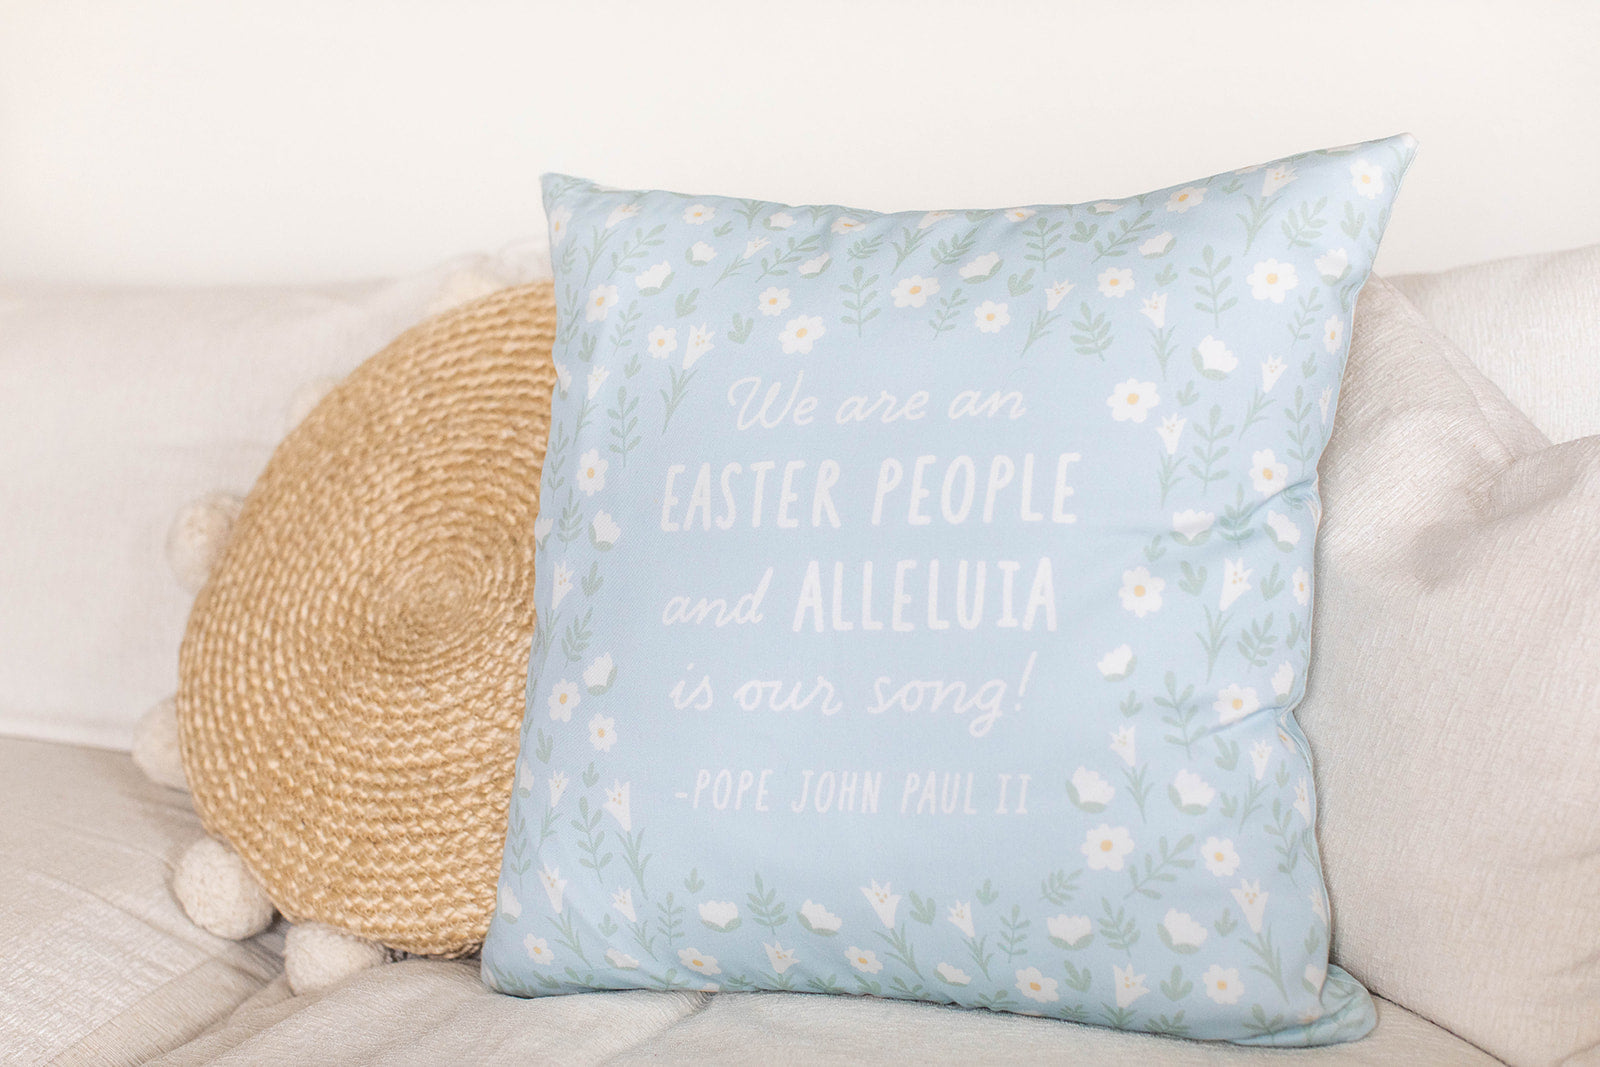 Easter People Throw Pillow - Blue